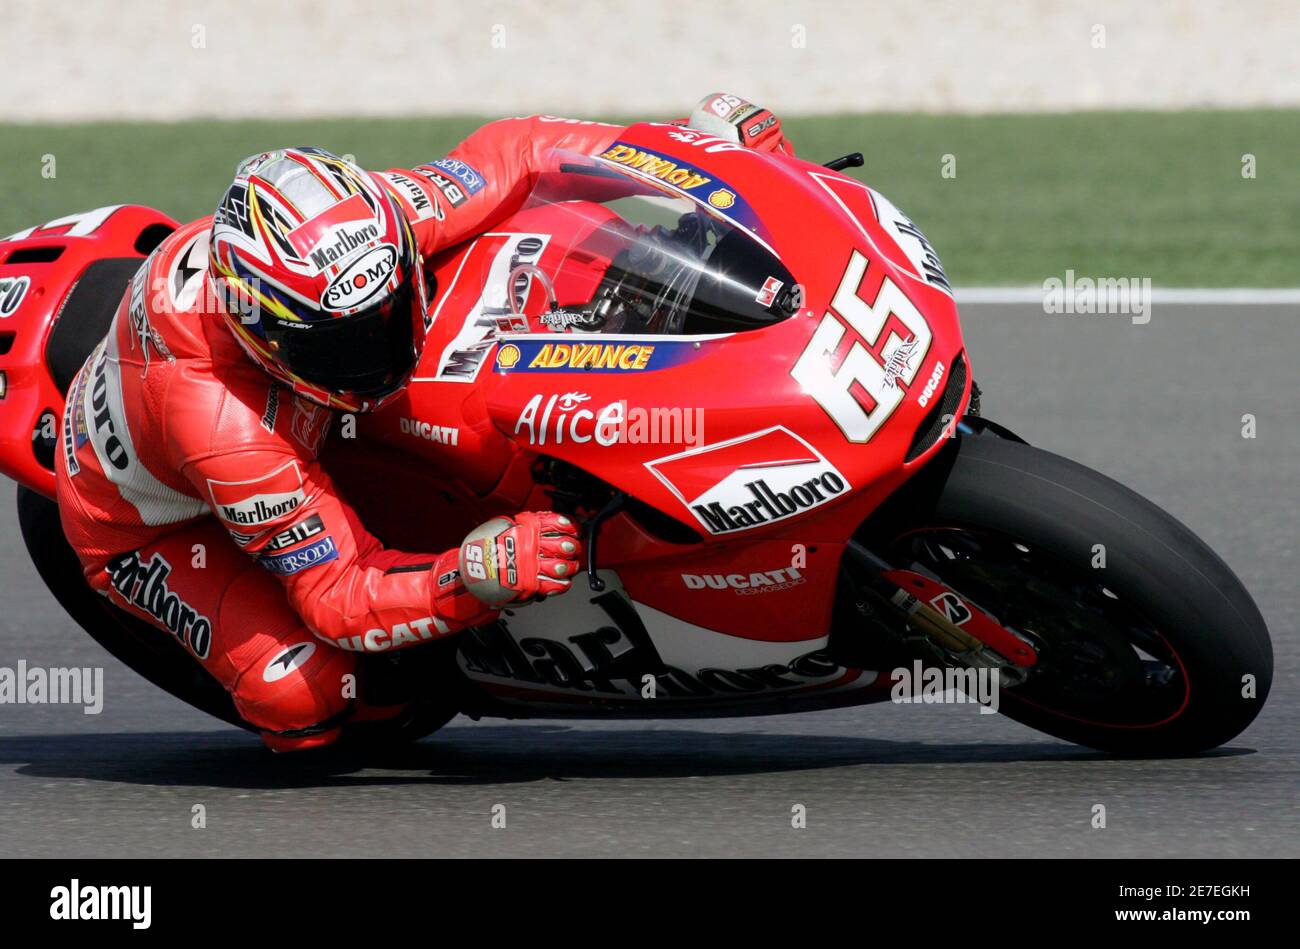 Ducati MotoGP rider Loris Capirossi of Italy takes a corner during a  morning qualifying practice session before the Qatar Grand Prix at Losail  International Circuit in Qatar September 29, 2005. REUTERS/Fadi Al-Assaad